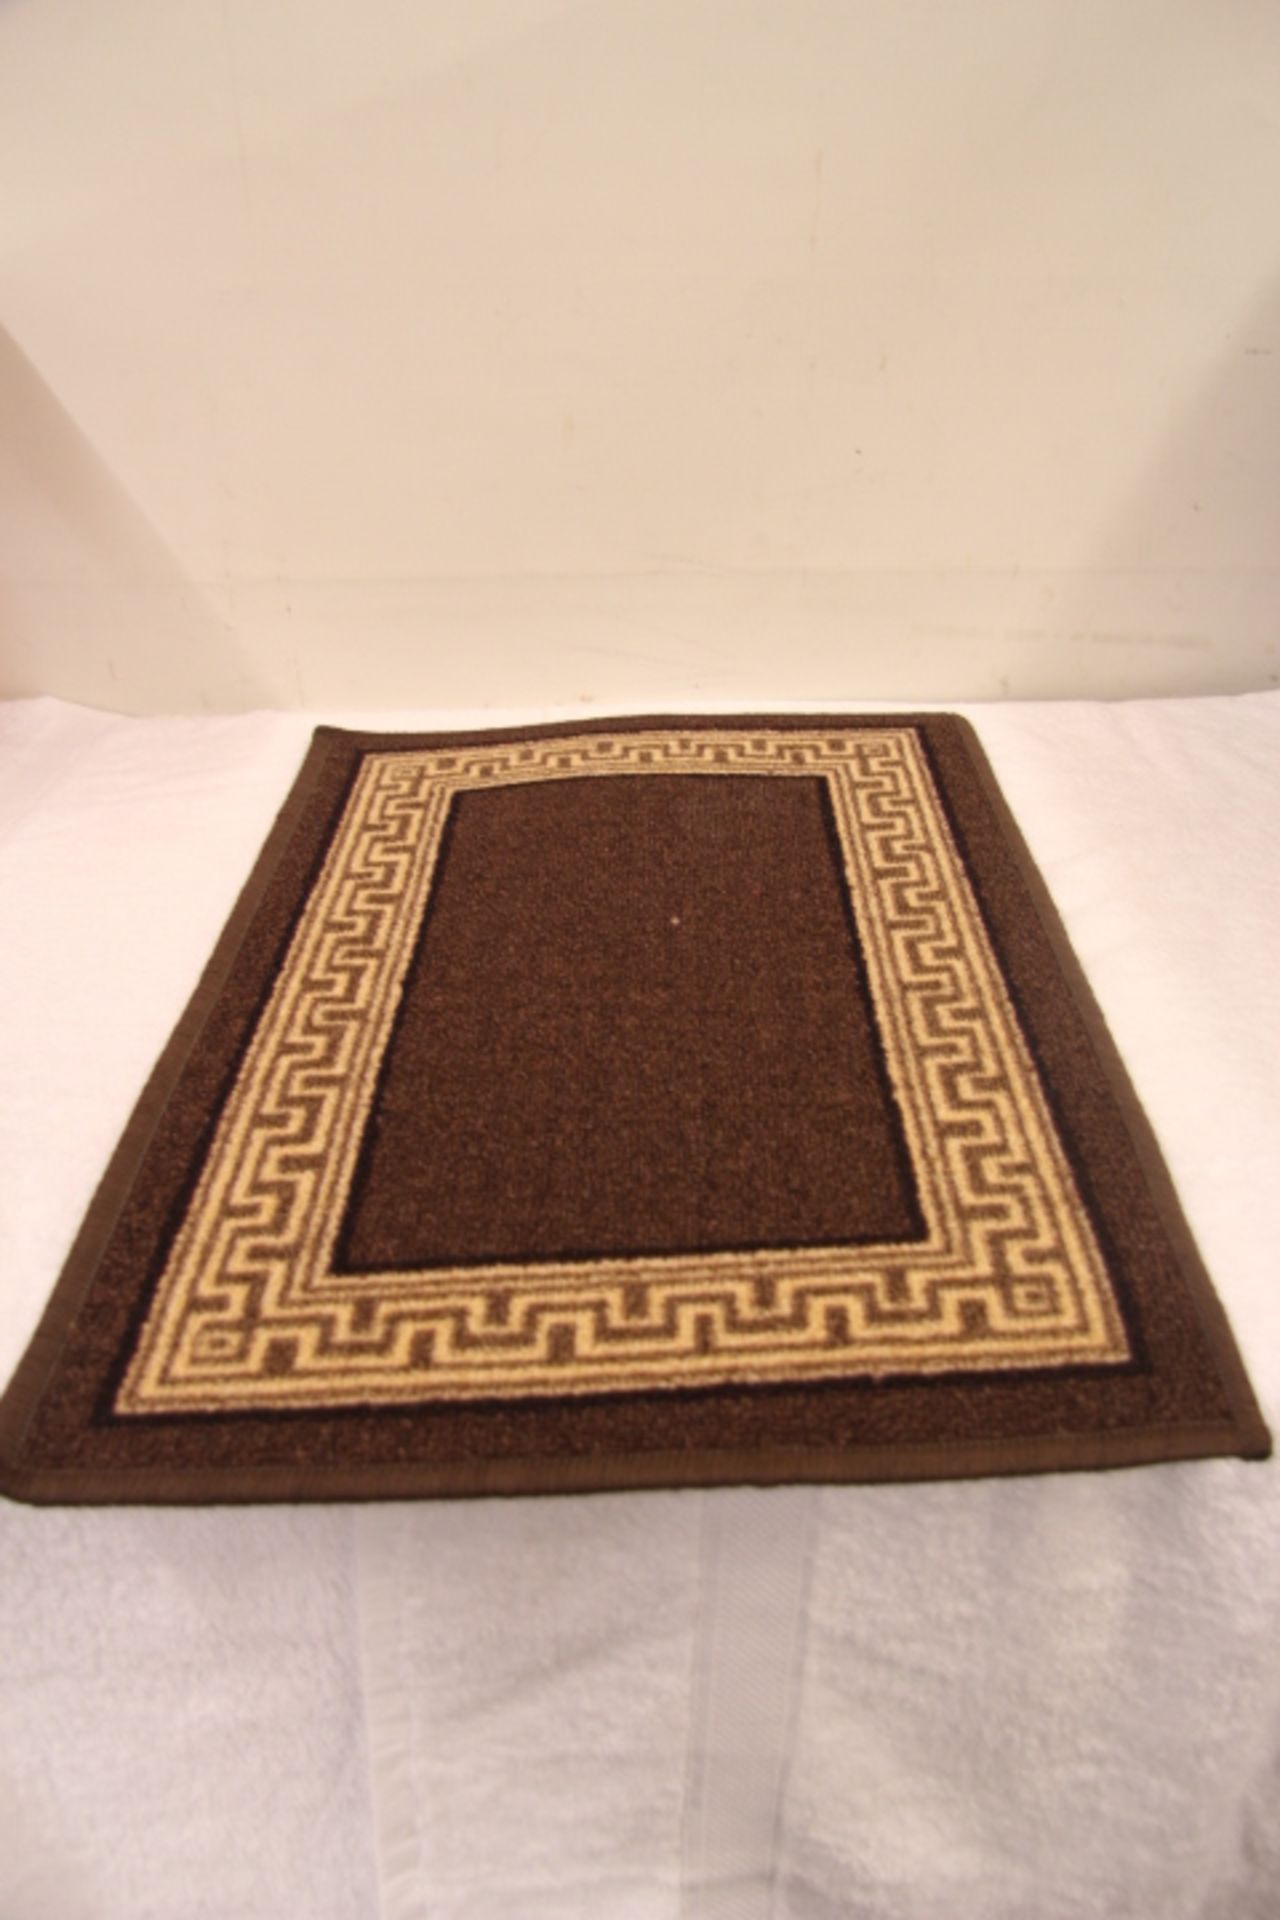 V Brand New 40 X 60cm Brown Decorative Door Mat X 2 YOUR BID PRICE TO BE MULTIPLIED BY TWO